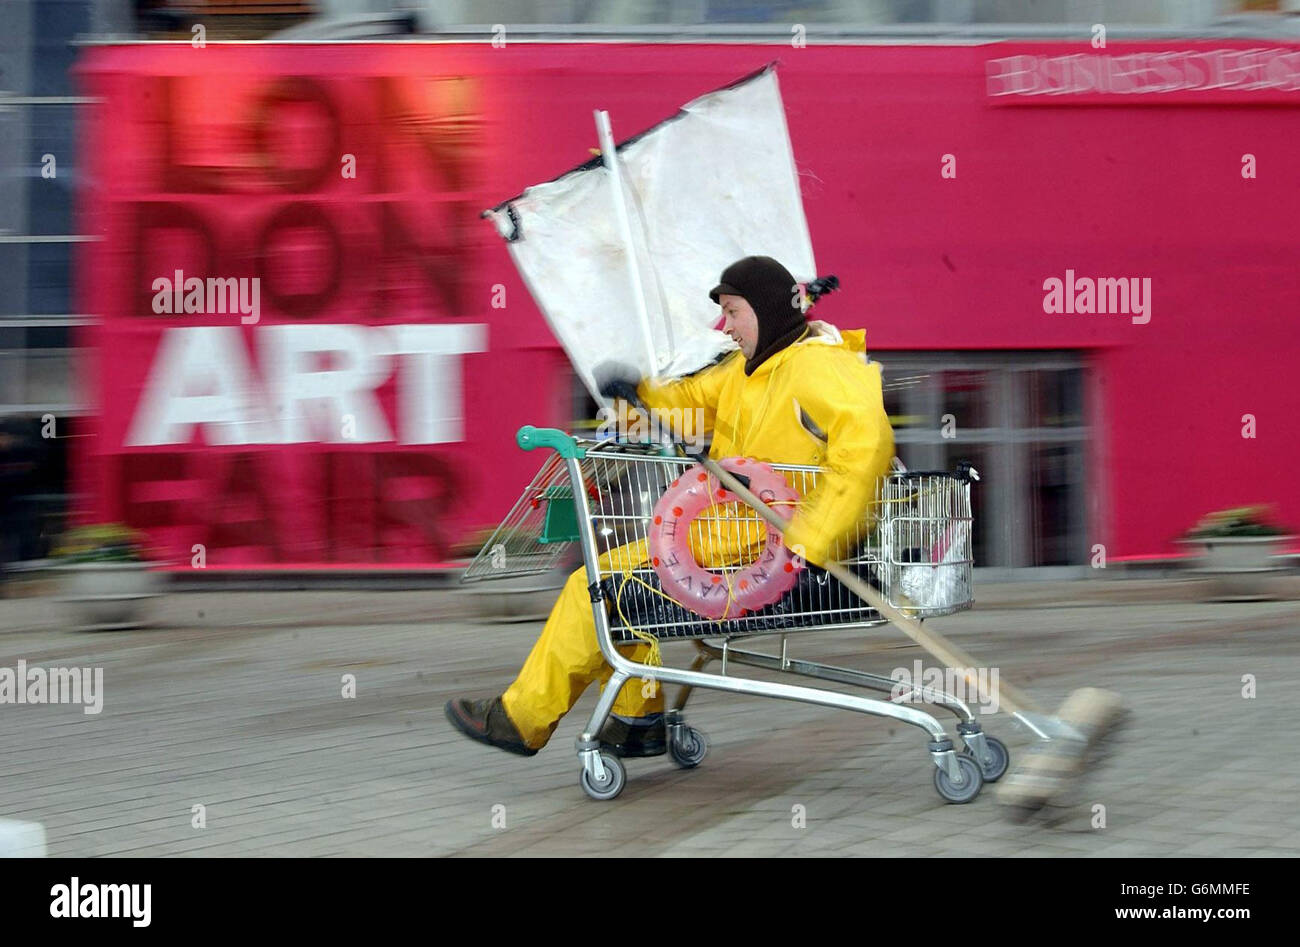 Mark McGowan, a 37-year-old artist from Peckham, south east London, propells himself along in a shopping trolley outside the London Art Fair at the Business Design Centre in Islington, North London. The performance artist is expected to start a journey to Glasgow from the Art Fair in the trolley tomorrow. The London Art Fair will run from 14-18 January 2004 and is expected to attract over 35,000 visitors. Stock Photo